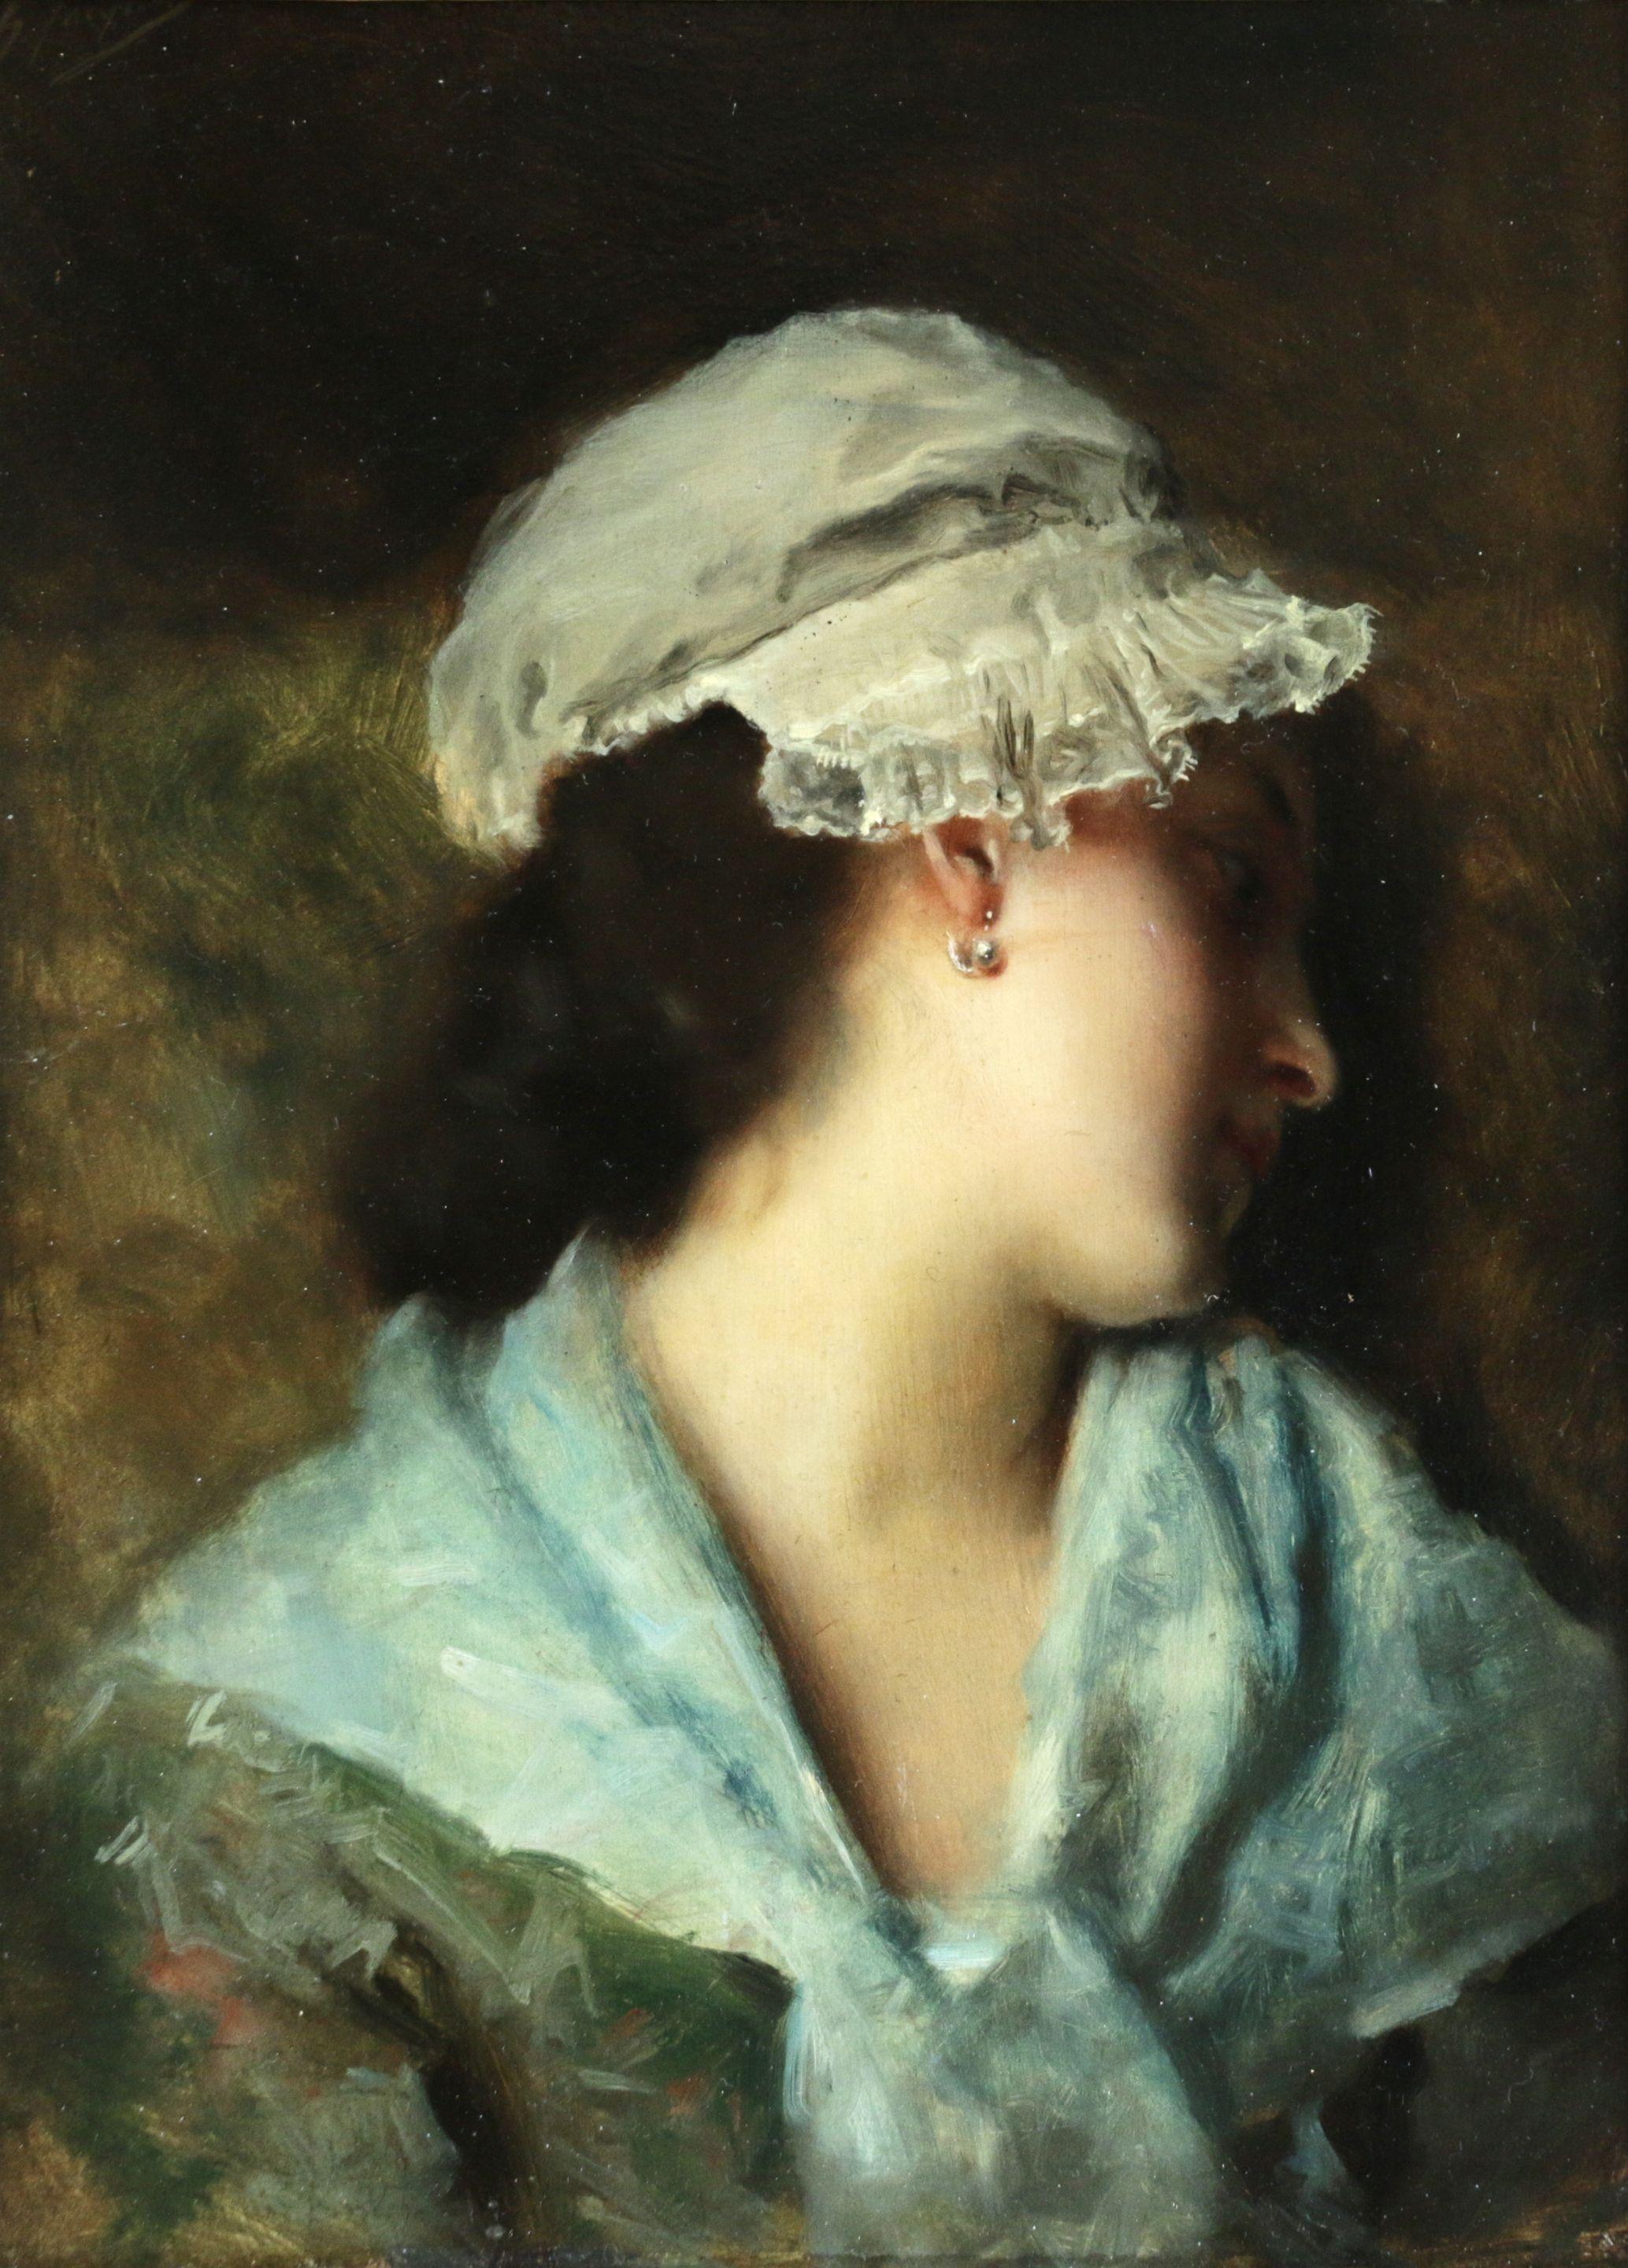 Gustave Jean Jacquet Portrait Painting - Fille au Repos - 19th Century Oil, Portrait of Girl Resting by Gustave Jacquet